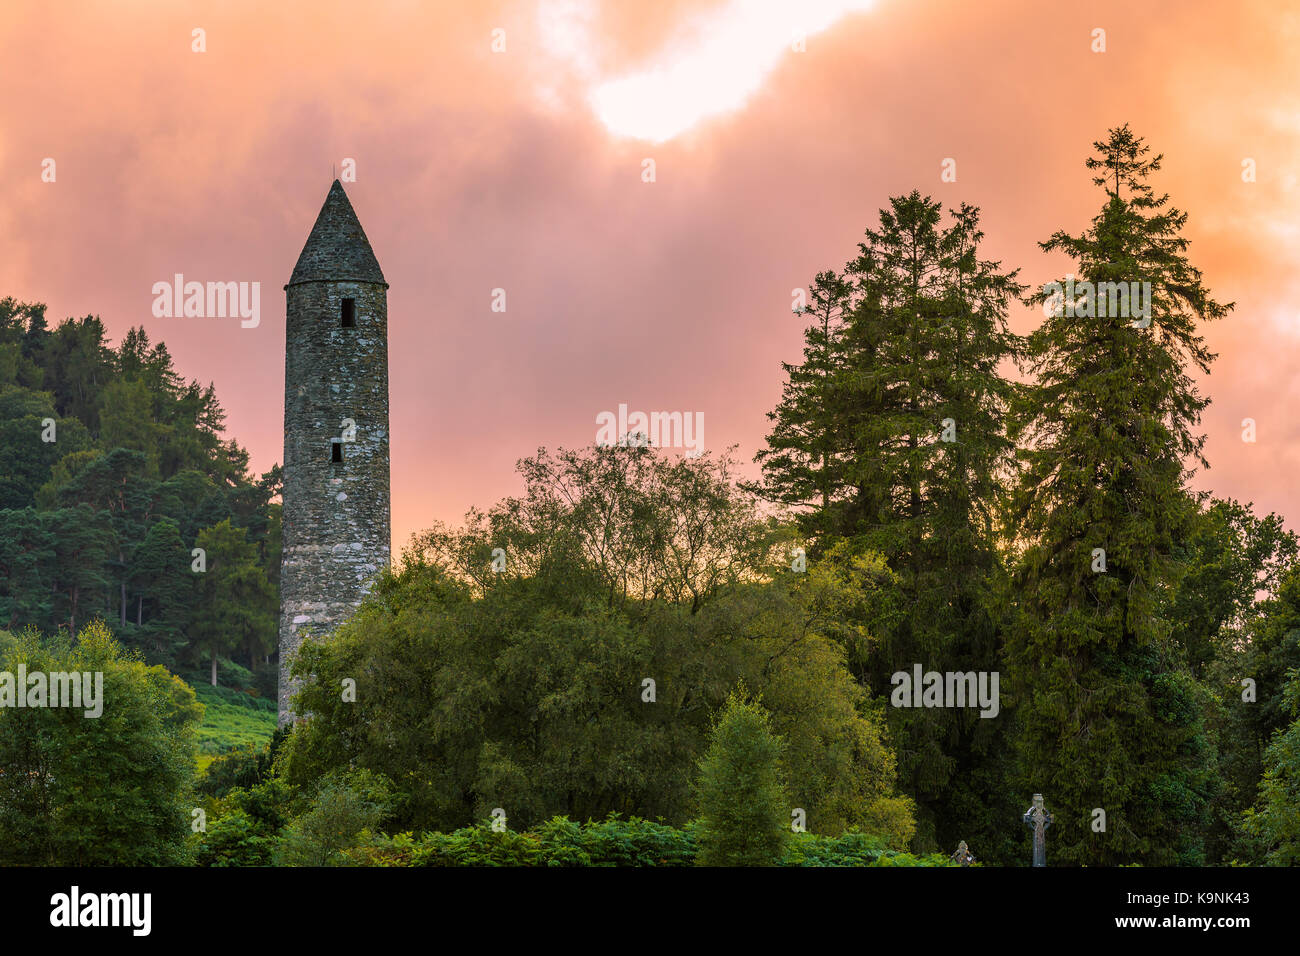 The round tower at Glendalough in County Wicklow, Ireland, renowned for an Early Medieval monastic settlement founded in the 6th century by St Kevin. Stock Photo